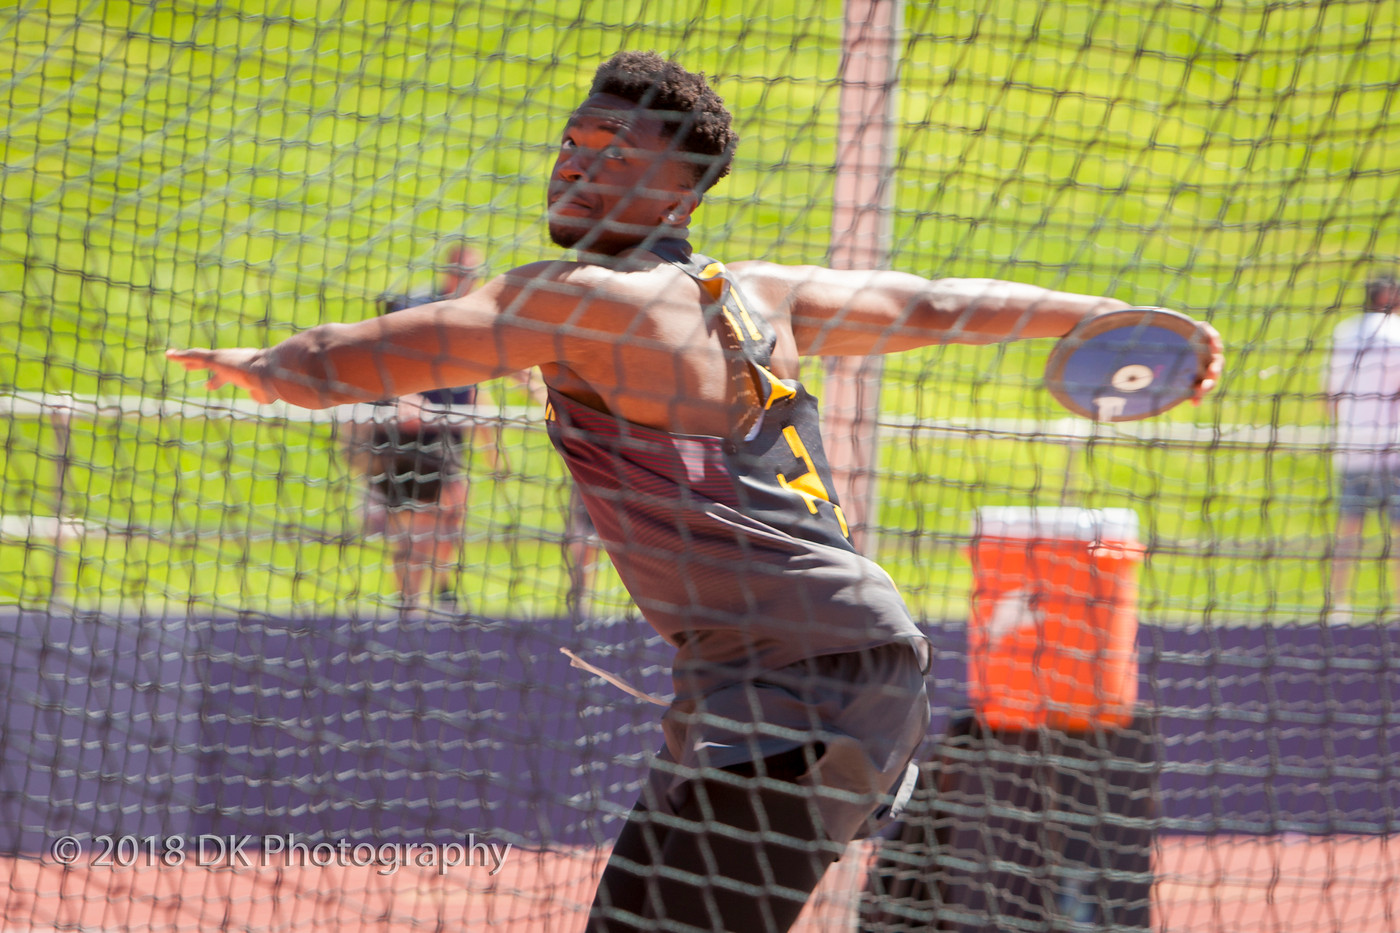 Ifyefobi finishes 7th in the Discus at the Yuba Last Chance meet with a distance of 131-1